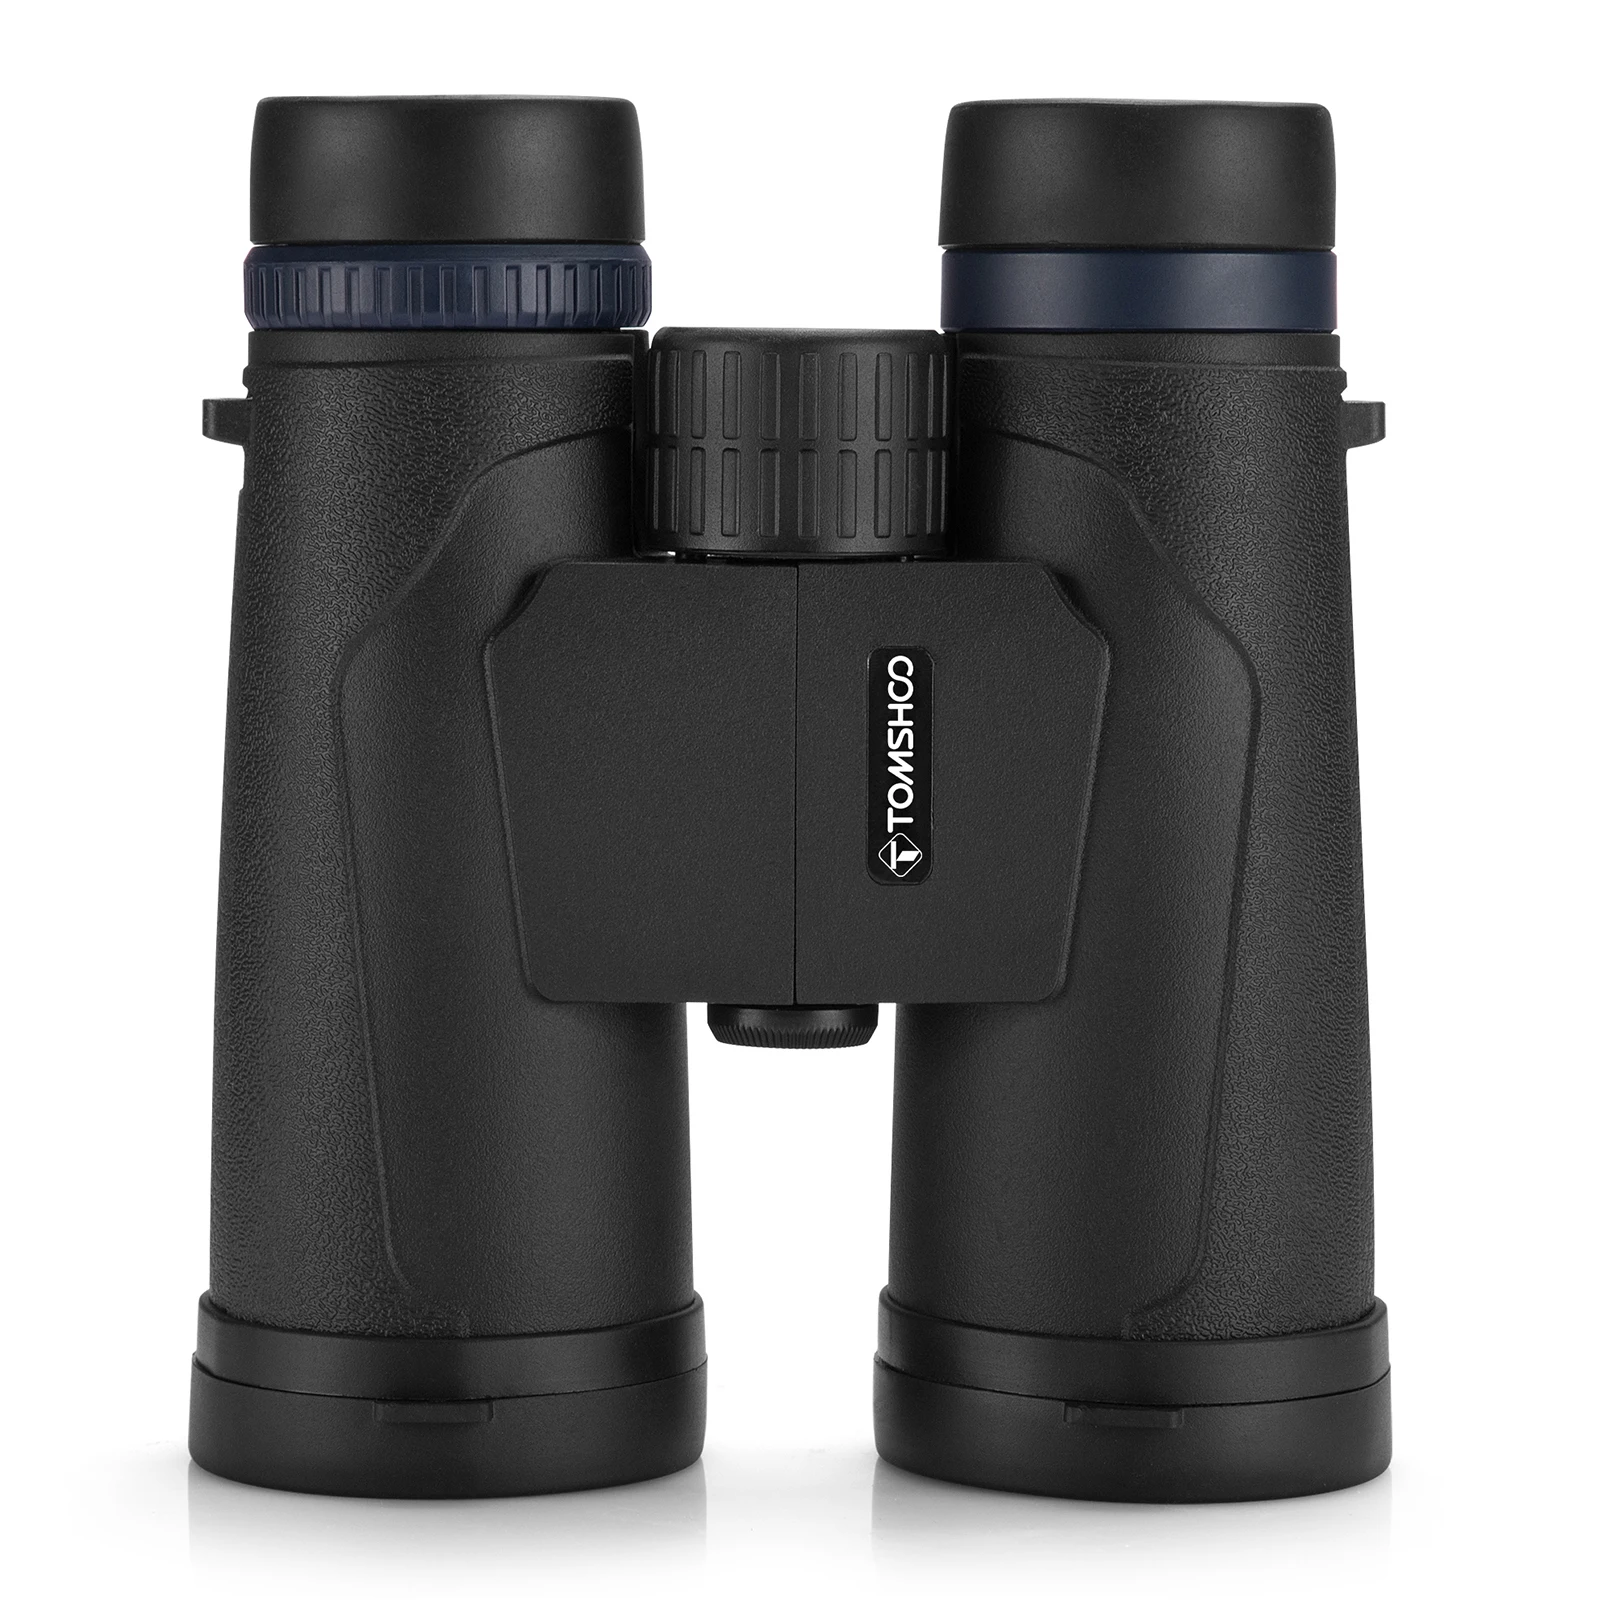 

TOMSHOO 10X42 Binoculars with Phone Mount Adapter Strap Carrying Bag for Adults Bird Watching Hunting Travel Concert